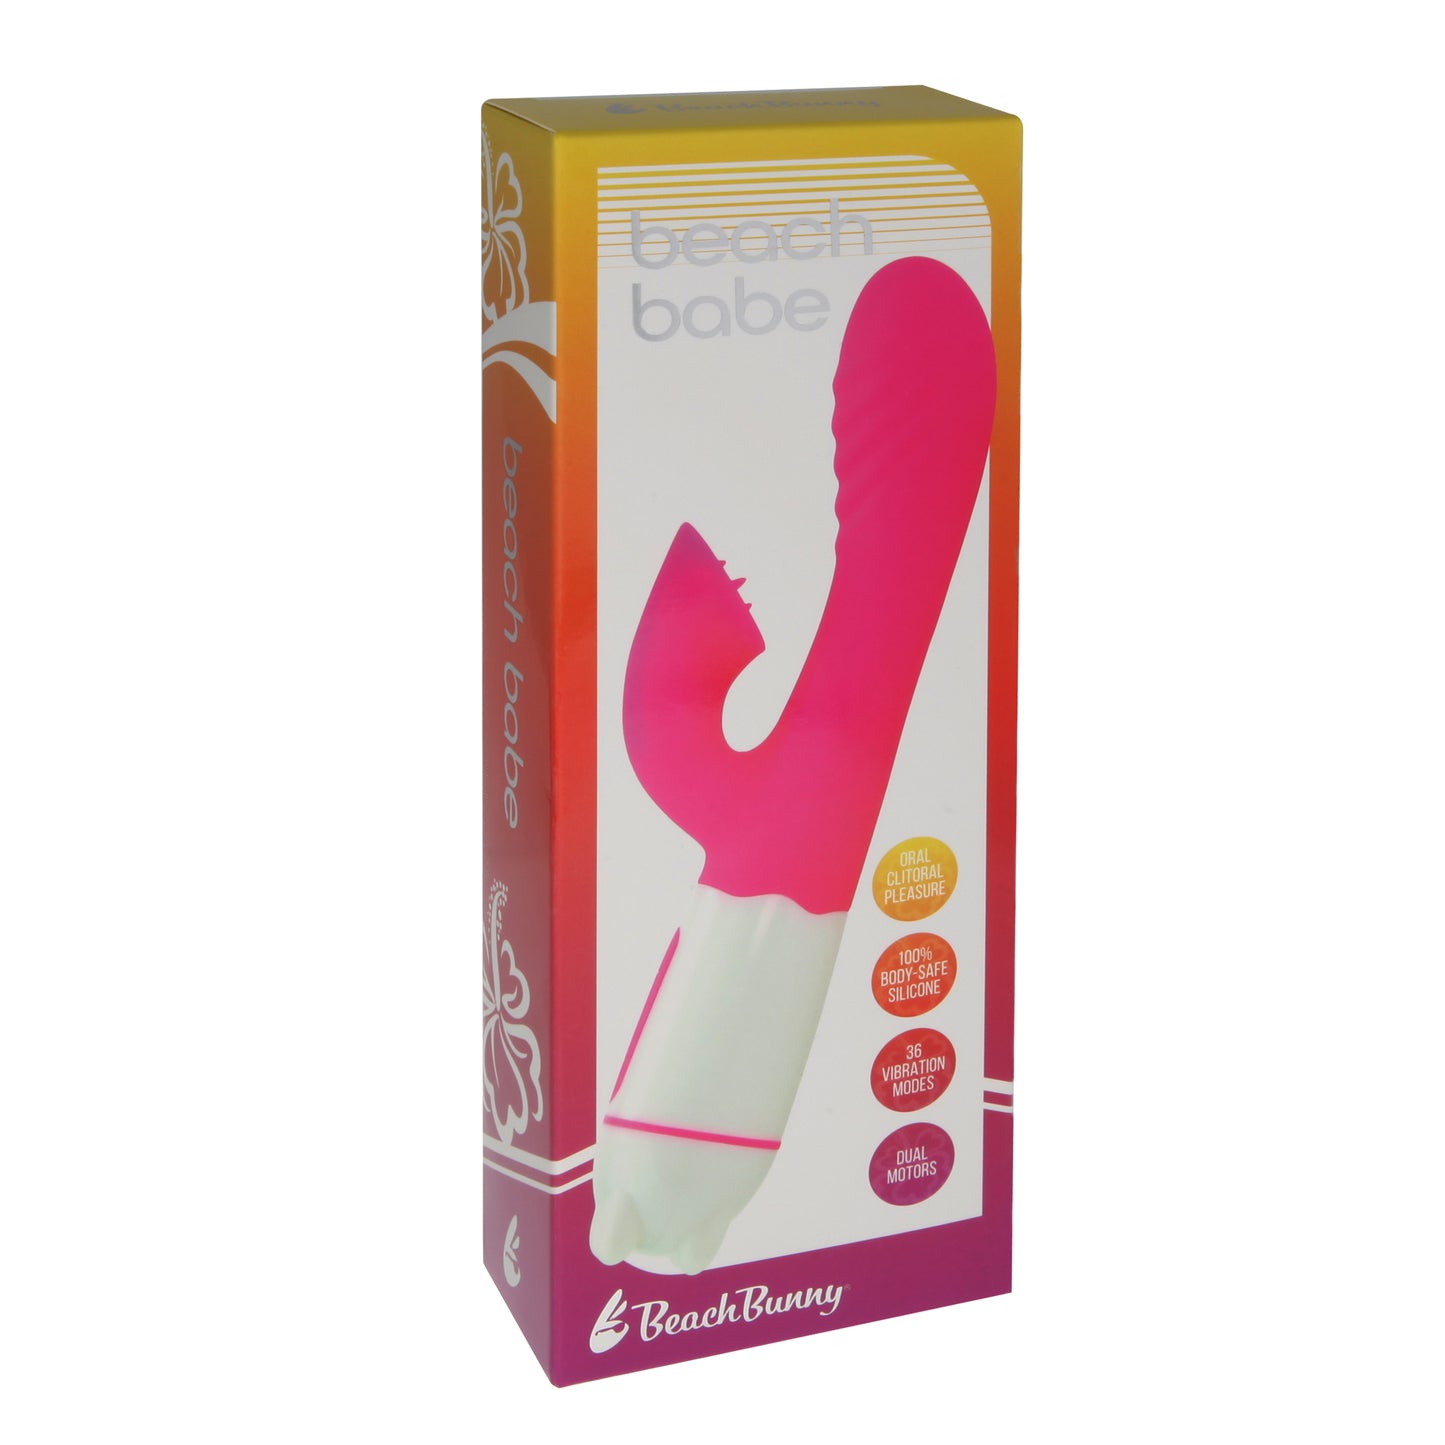 Bendable Rabbit Vibrator with Clitoral Licking - Beach Babe